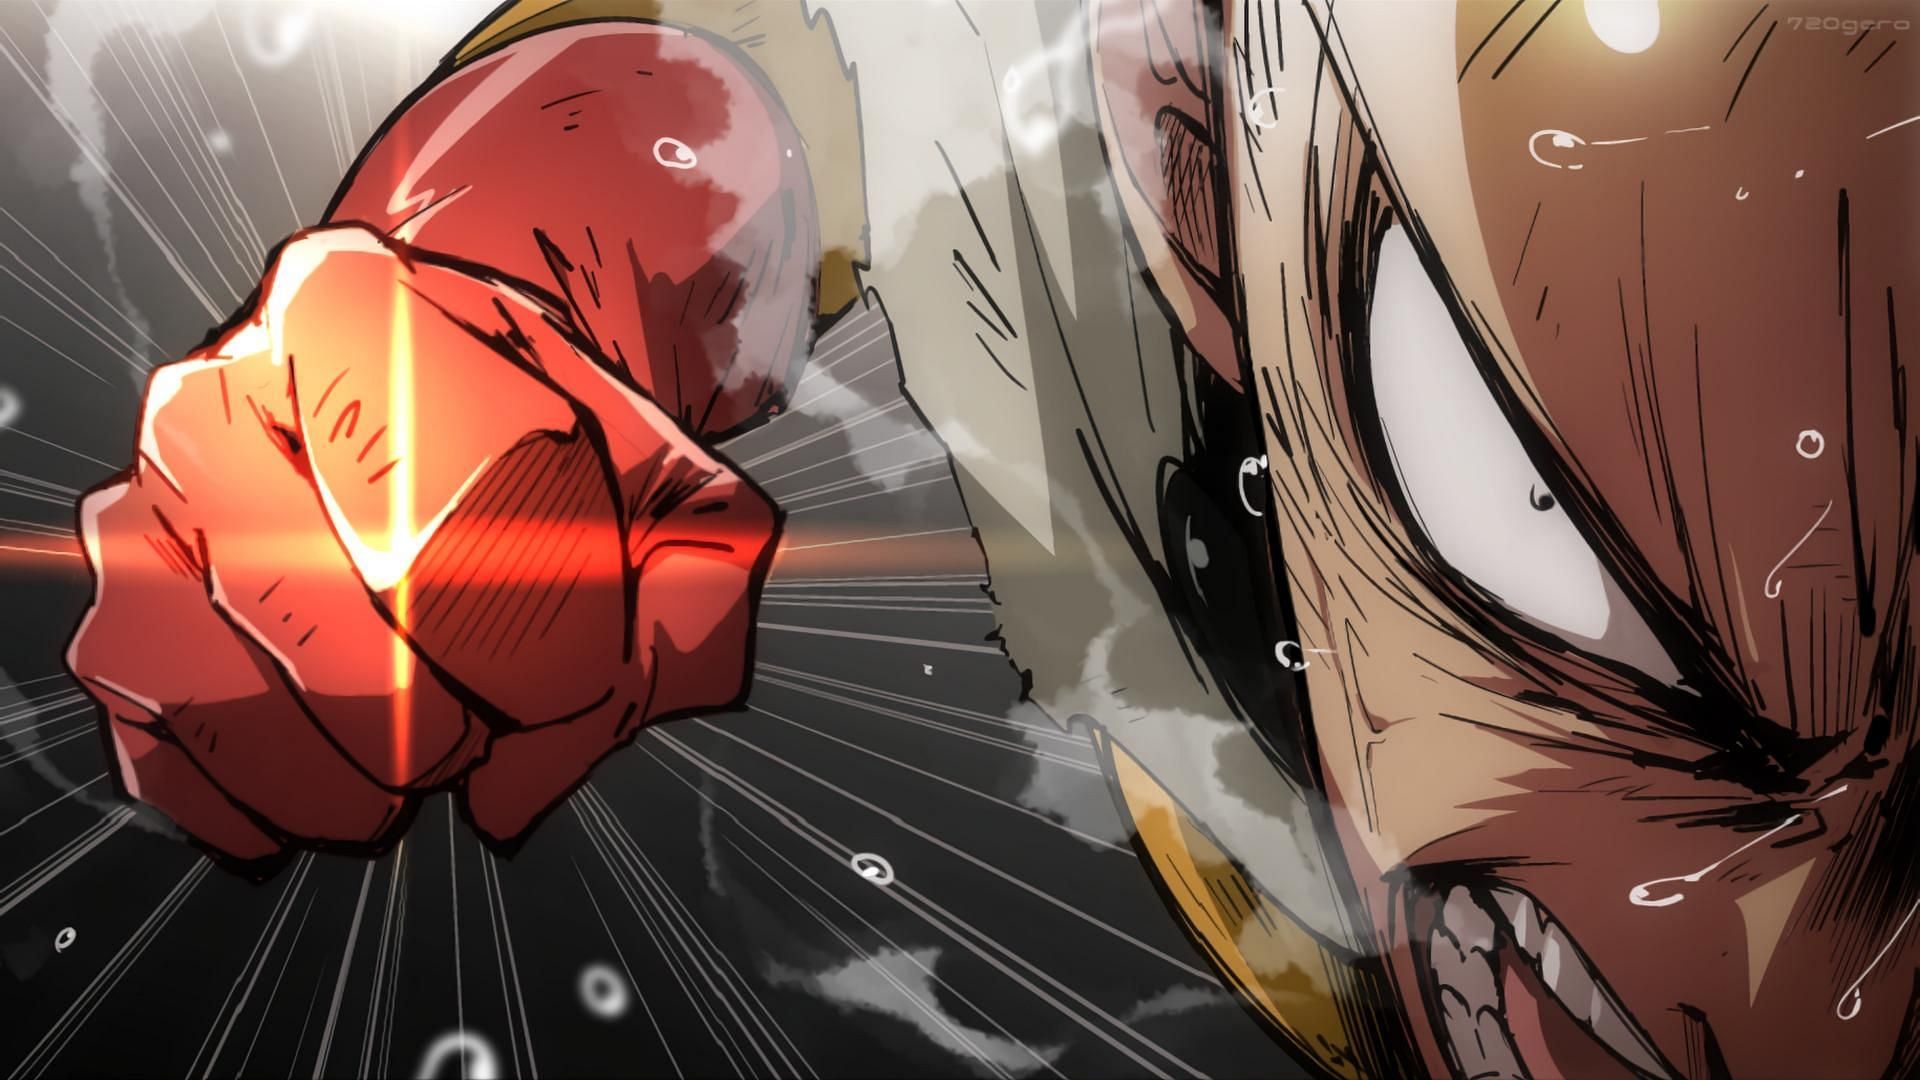 One Punch Man Chapter 167 (Spoilers): Saitama ends it all while